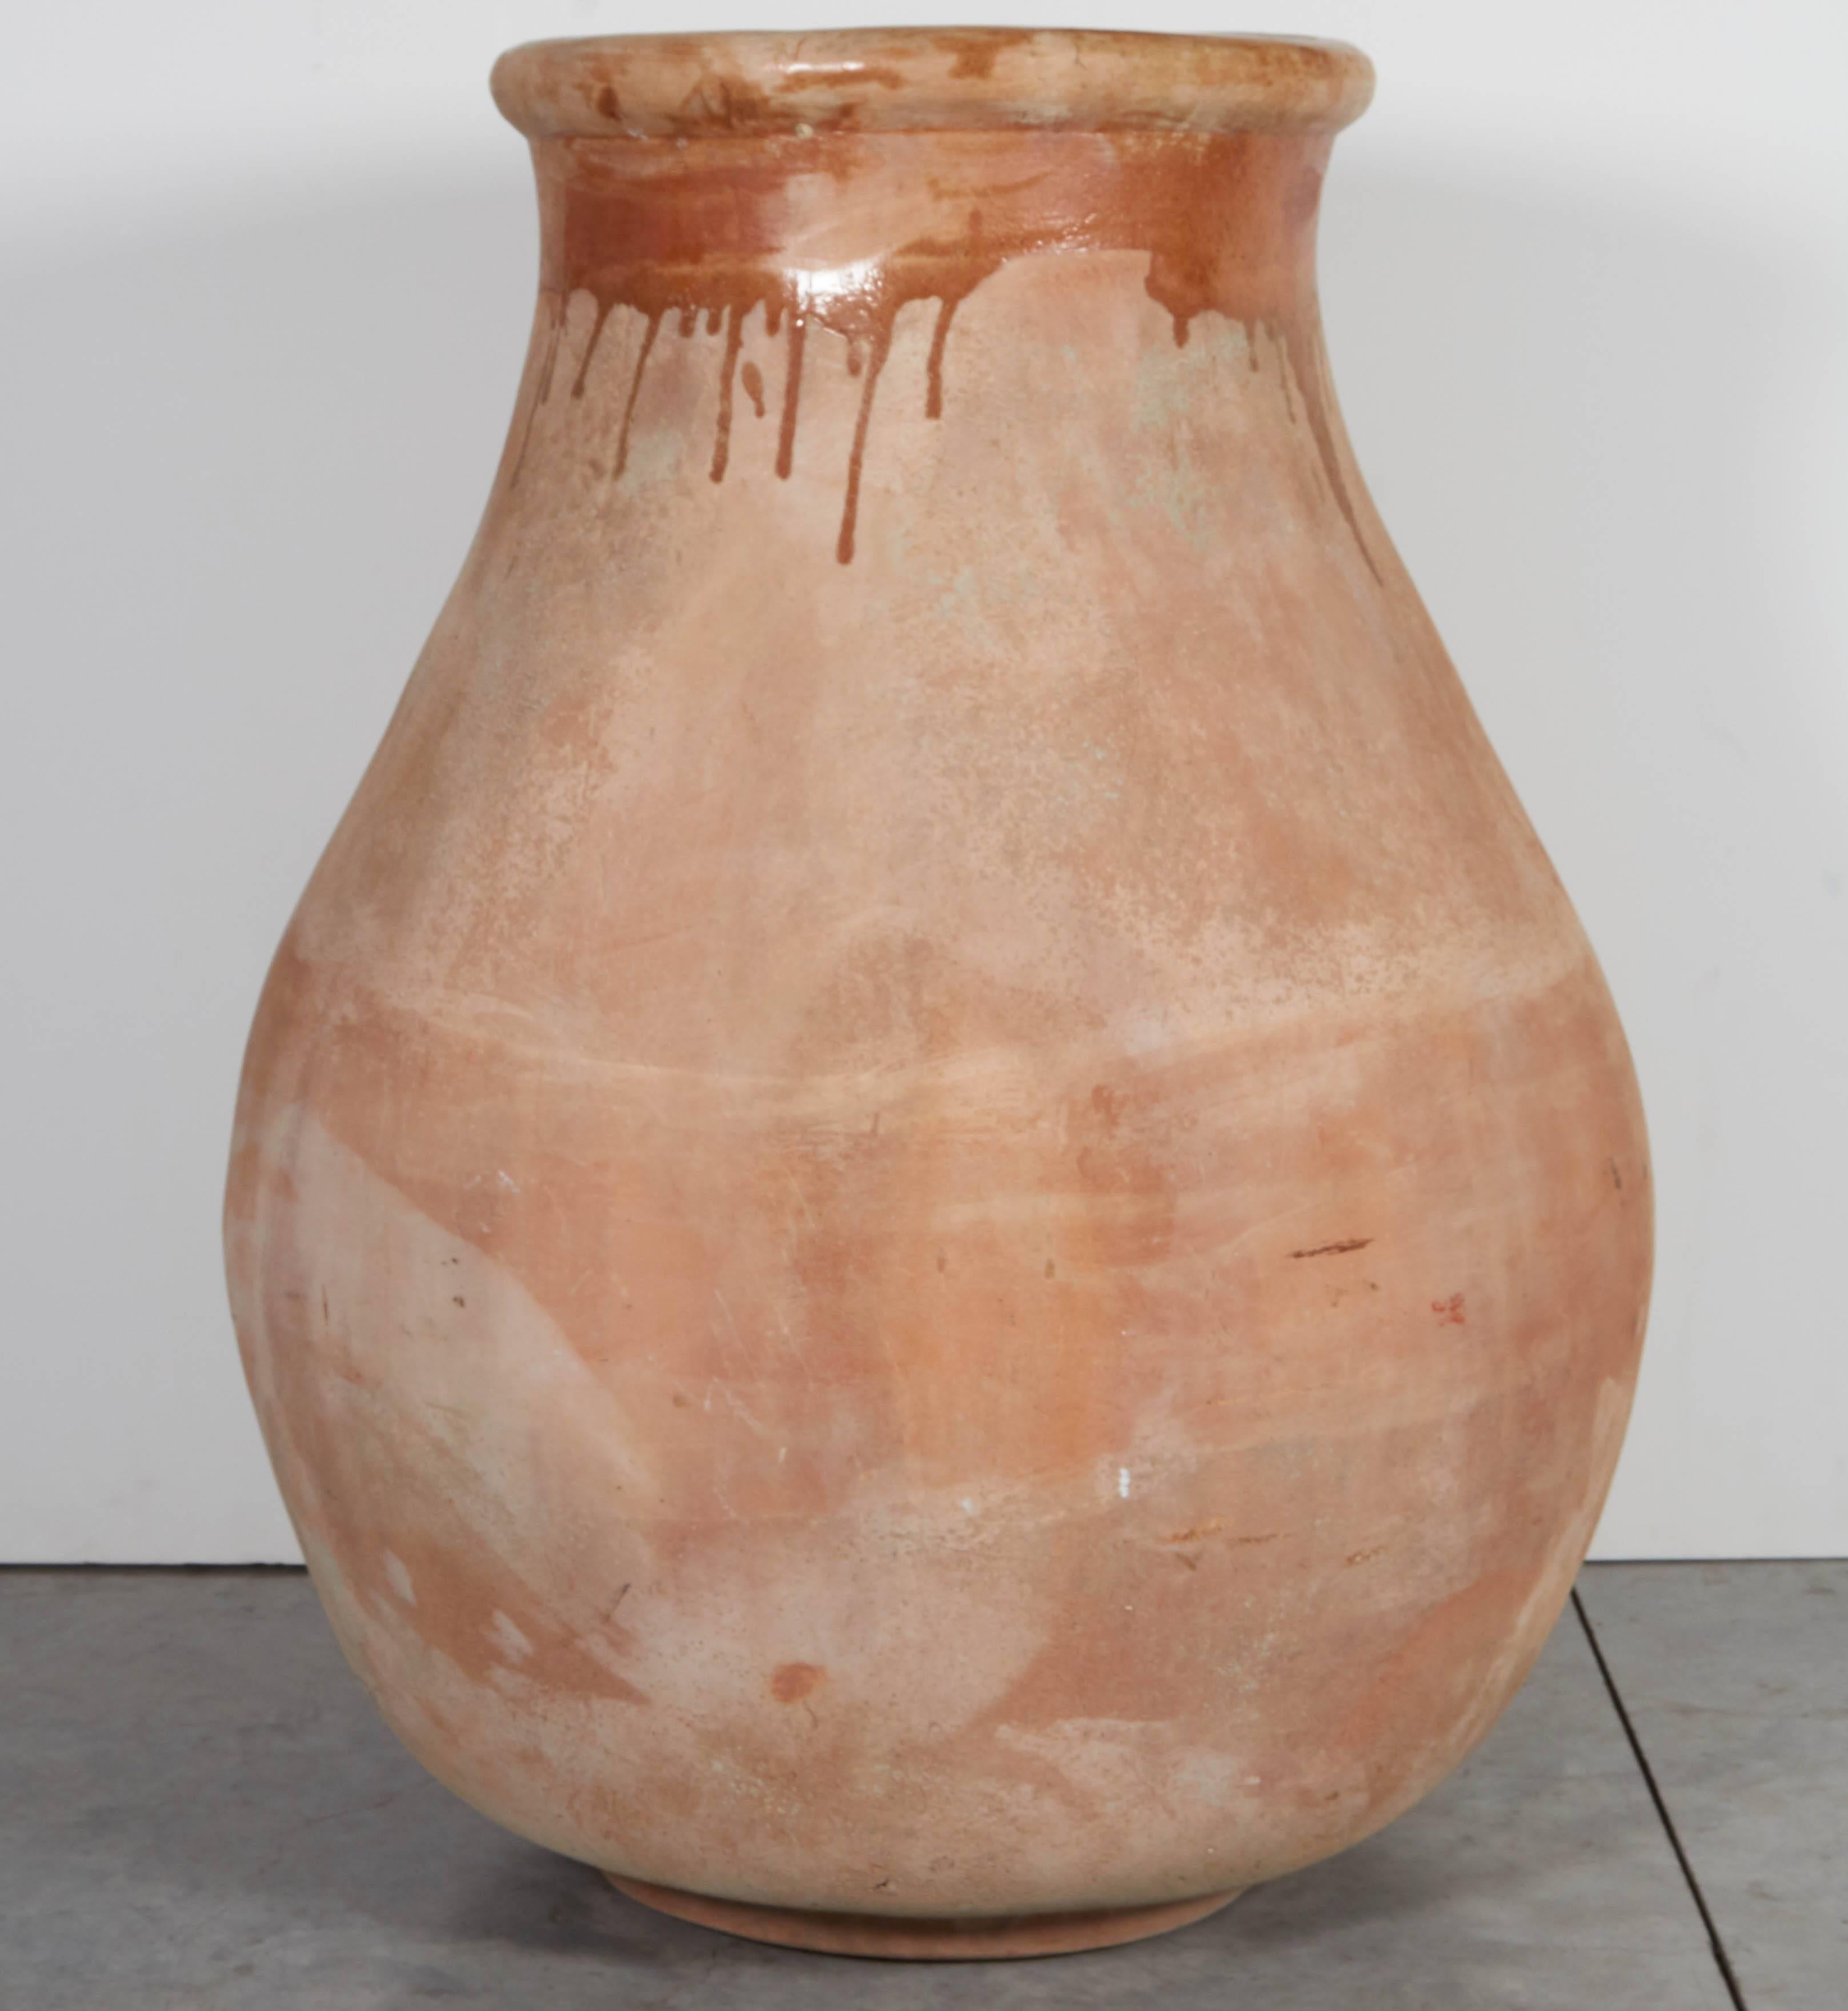 Tall, Graceful Earthenware Jar in Washed Out Mediterranean Hues For Sale 4